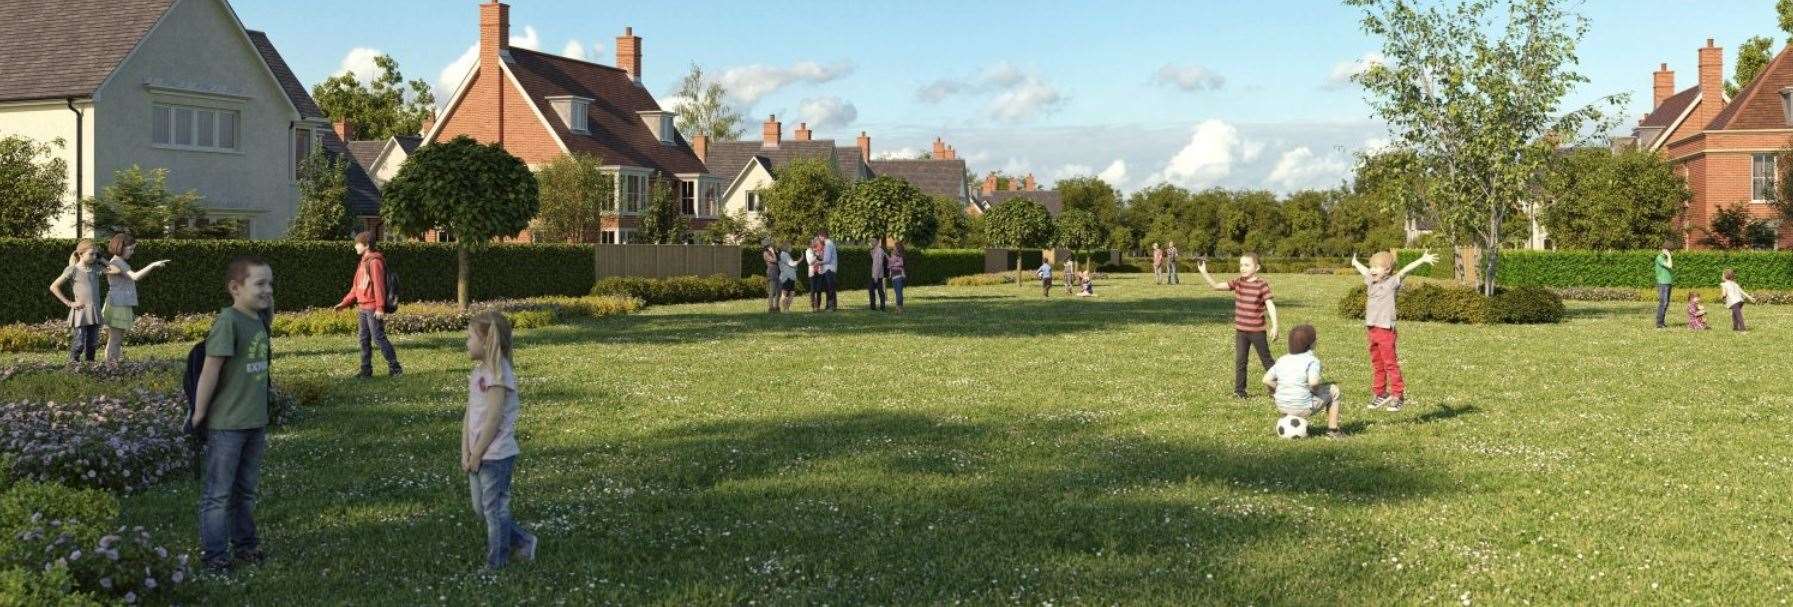 Artist's impression of what Highsted Park Garden Village could look like in Sittingbourne